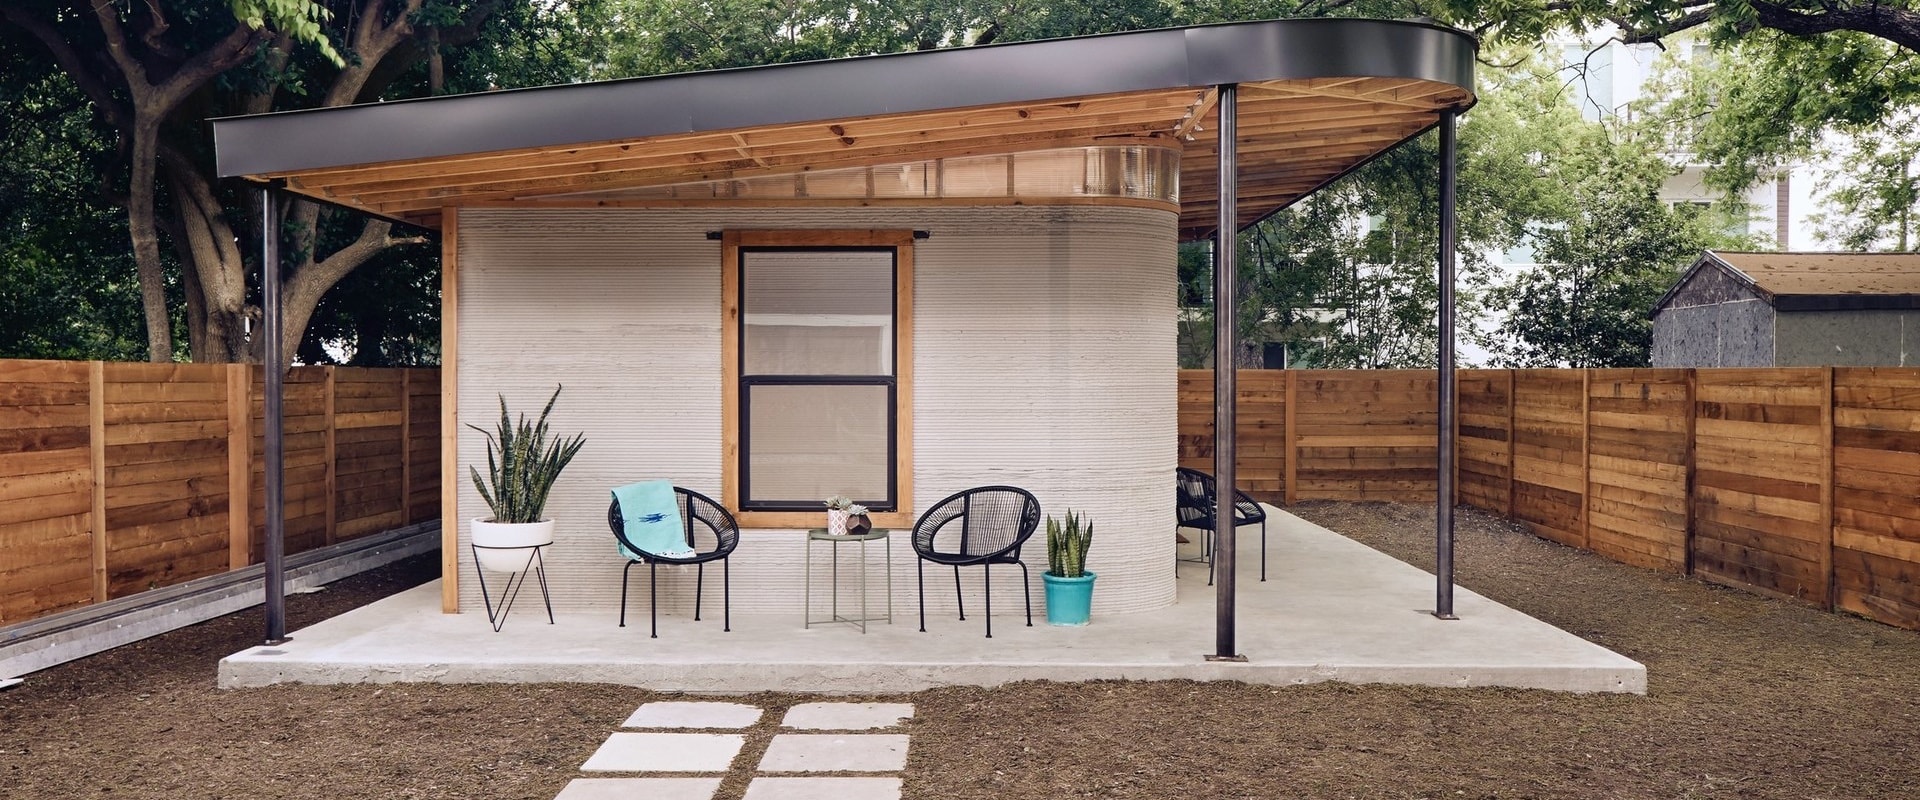 America’s first 3D-printed house in Austin, Texas, made with ICON’s innovative technology.